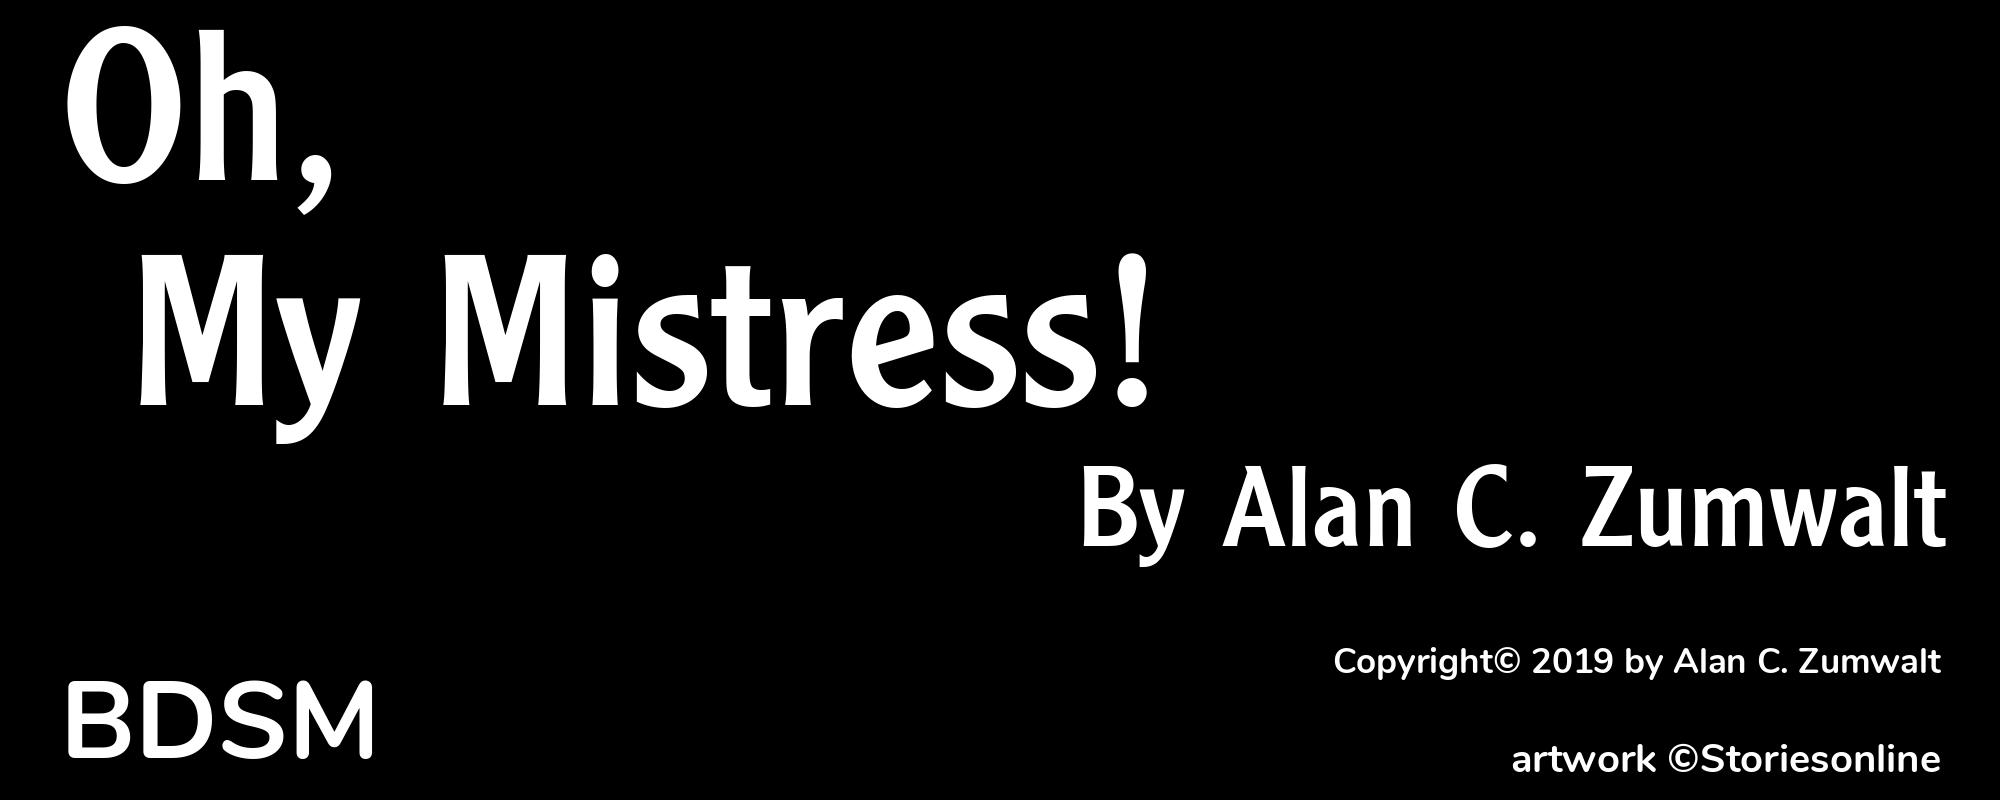 Oh, My Mistress! - Cover